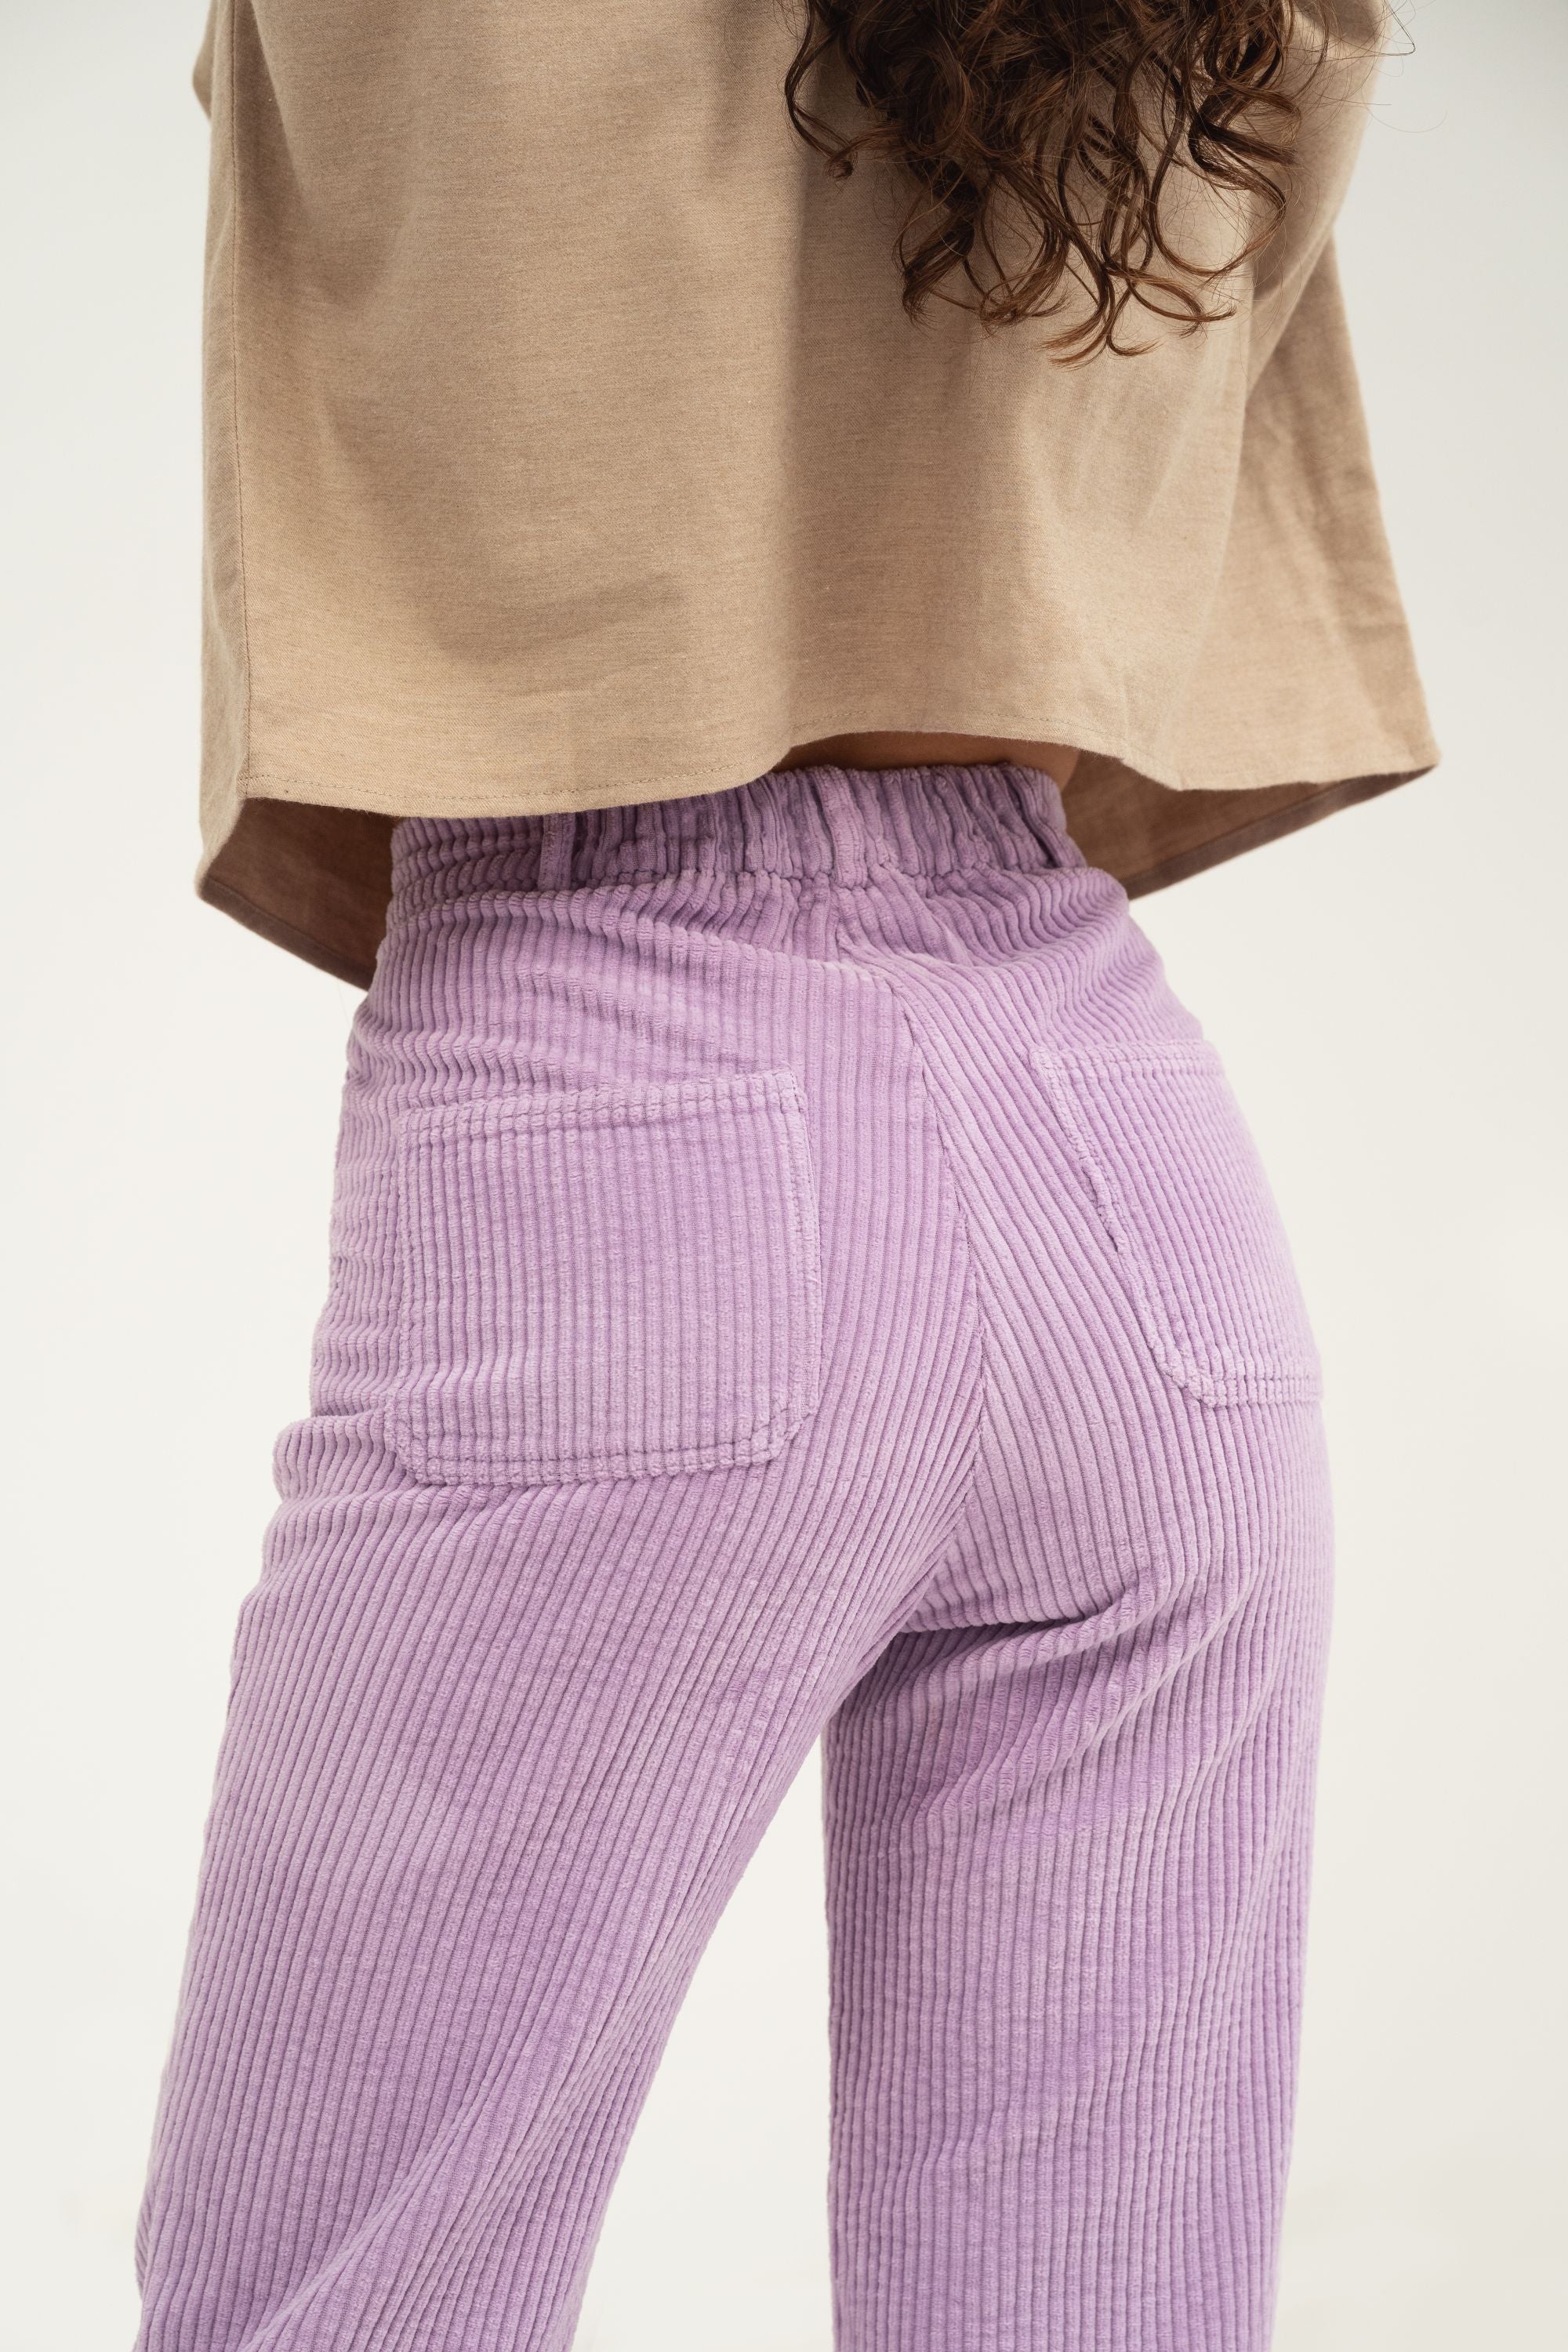 Lilac cotton corduroy trousers, women's, with zipper and elastic waist. Made in Portugal. 